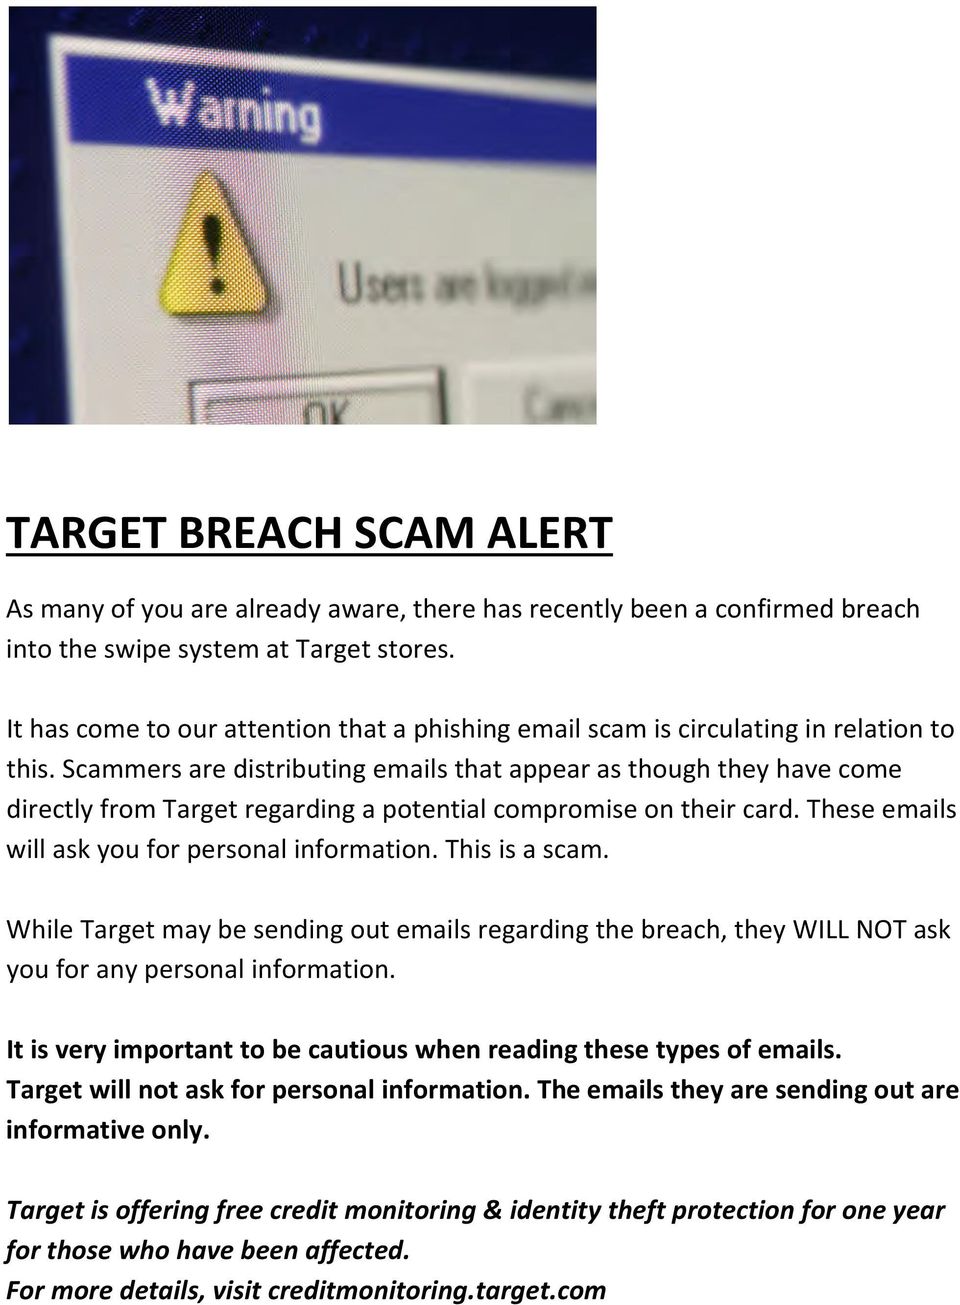 Scammers are distributing emails that appear as though they have come directly from Target regarding a potential compromise on their card. These emails will ask you for personal information.